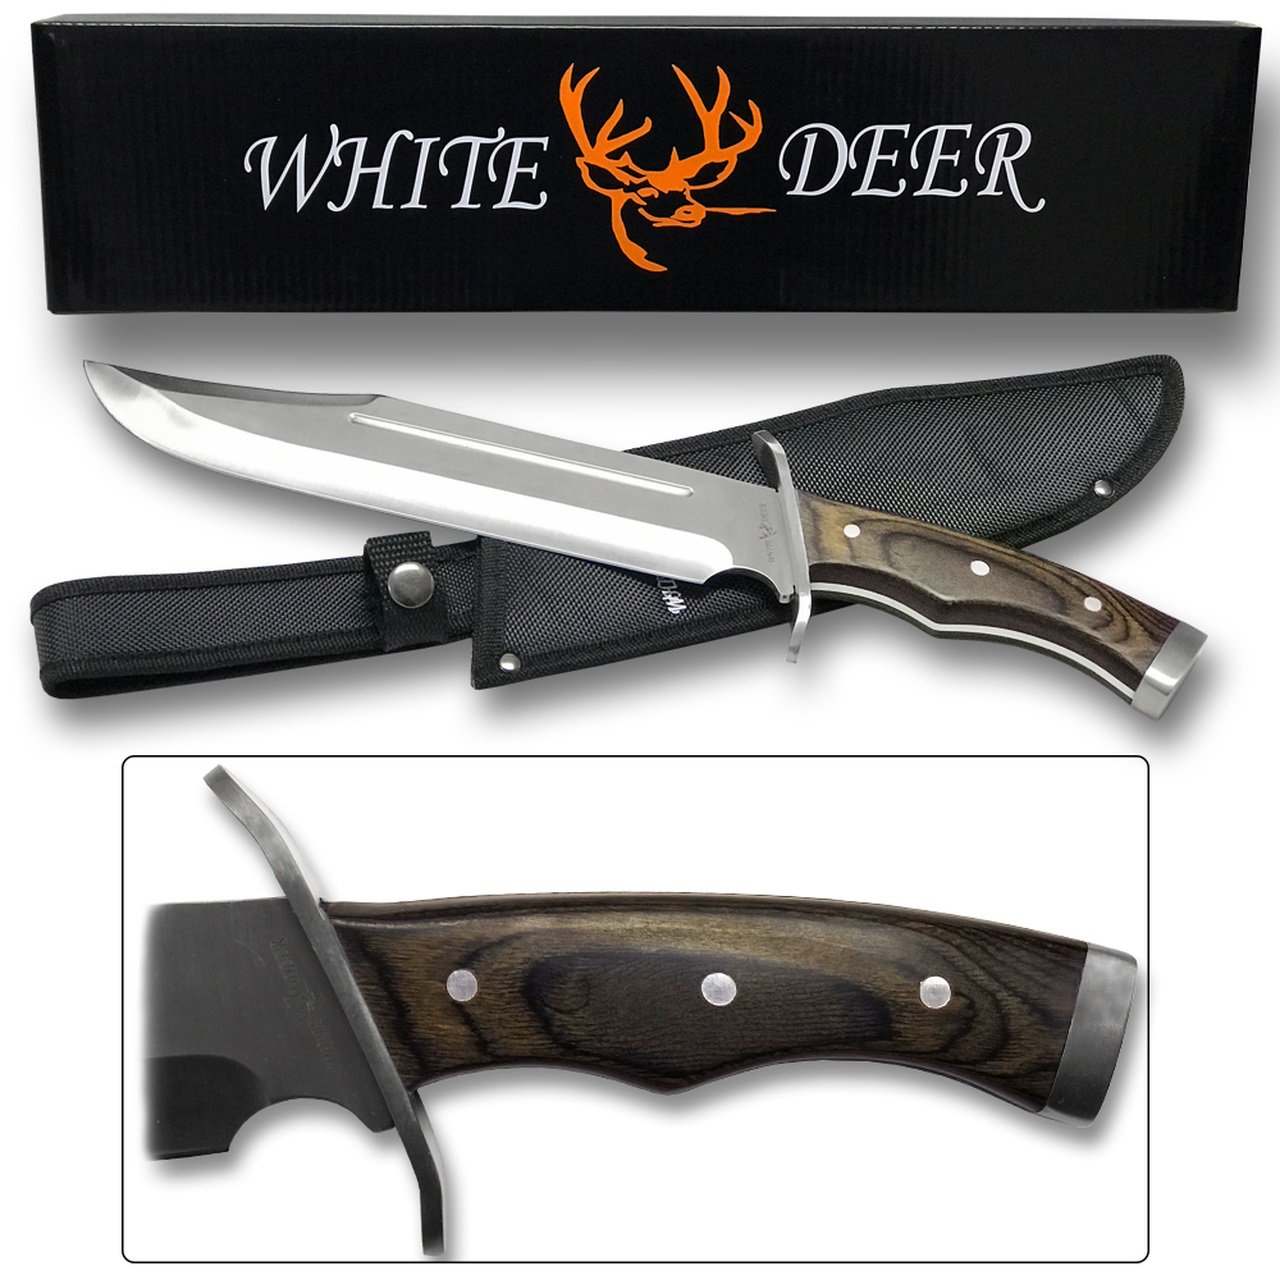 White Deer Full Tang SURVIVOR Bowie Fixed Blade Knife W/Sheath FREE SHIPPING